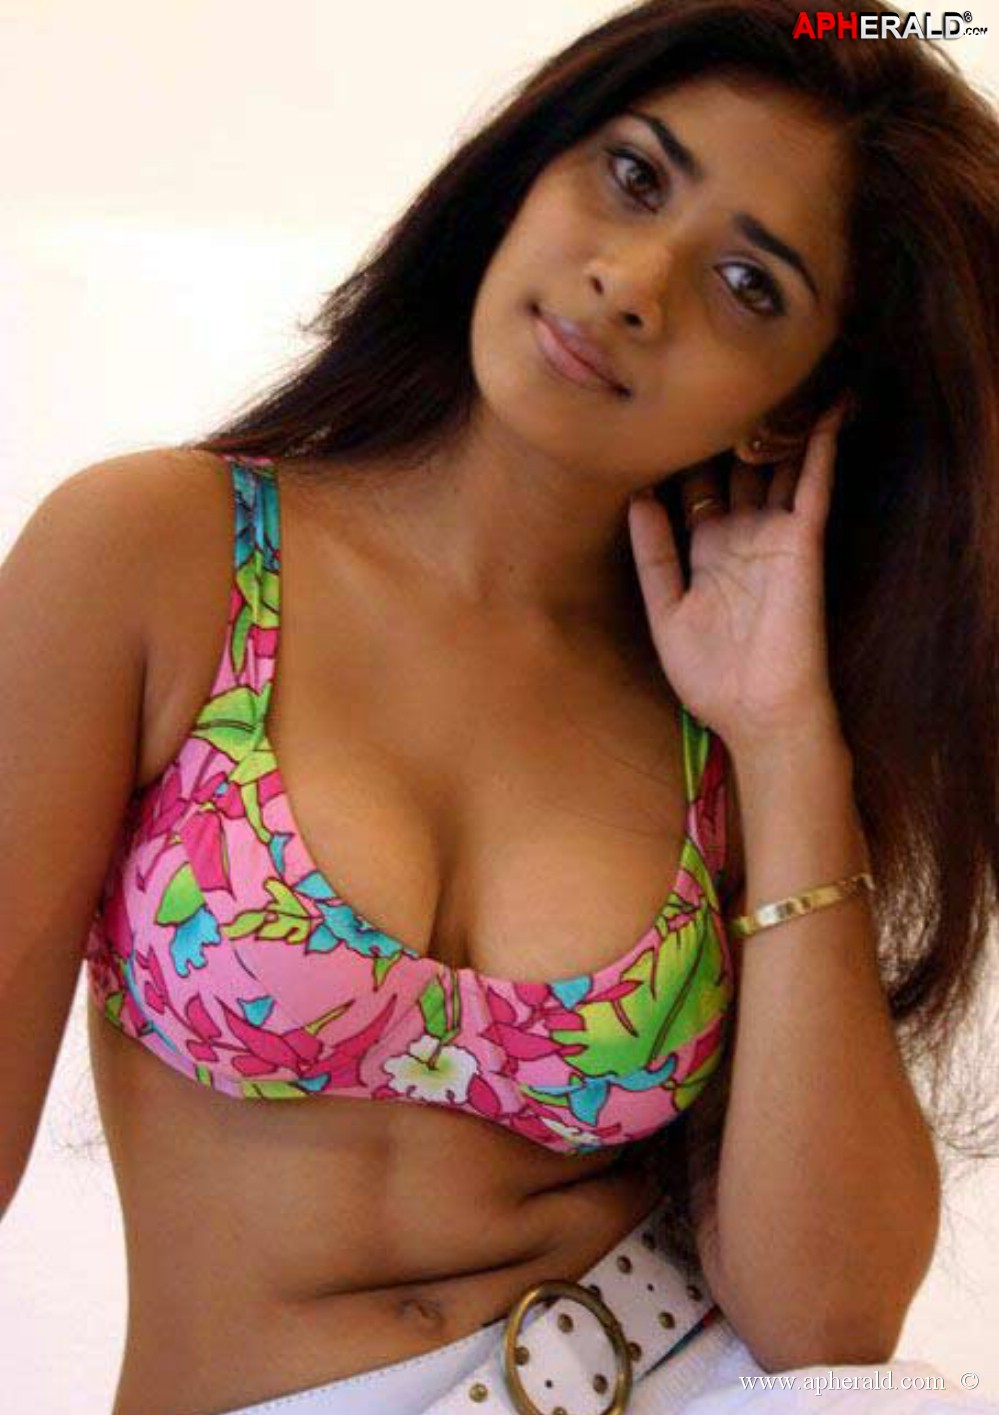 Discover the Most Gorgeous Sri Lankan Boobs in This Stunning Galery.